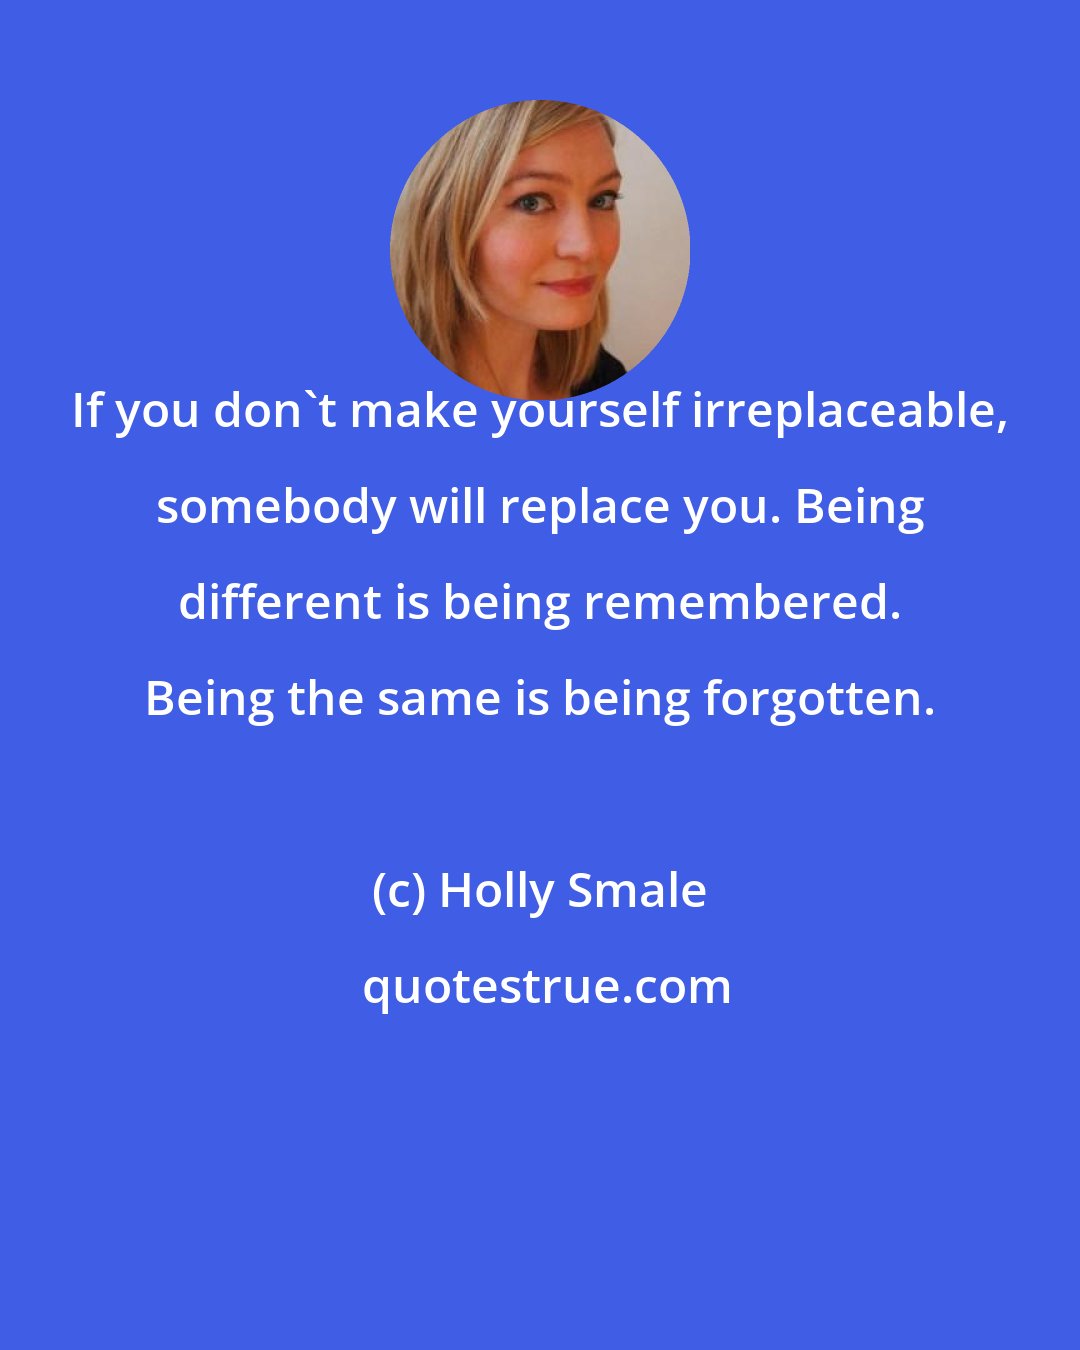 Holly Smale: If you don't make yourself irreplaceable, somebody will replace you. Being different is being remembered. Being the same is being forgotten.